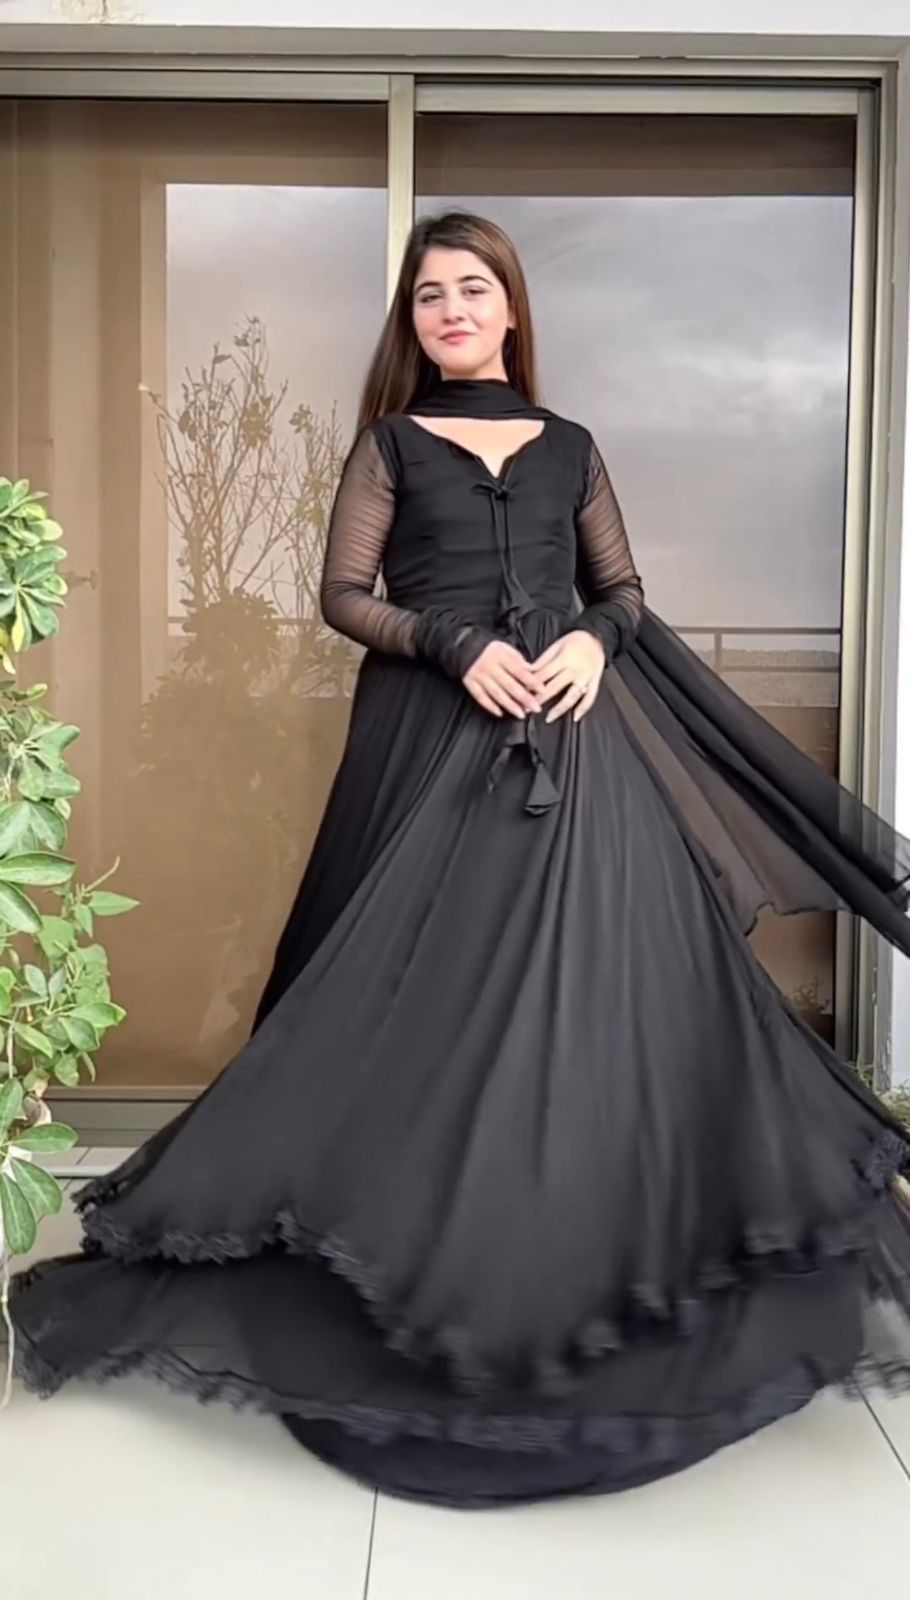 Gothic Black Mermaid Formal Evening Dress Prom Party Gowns with Detachable  Train | eBay